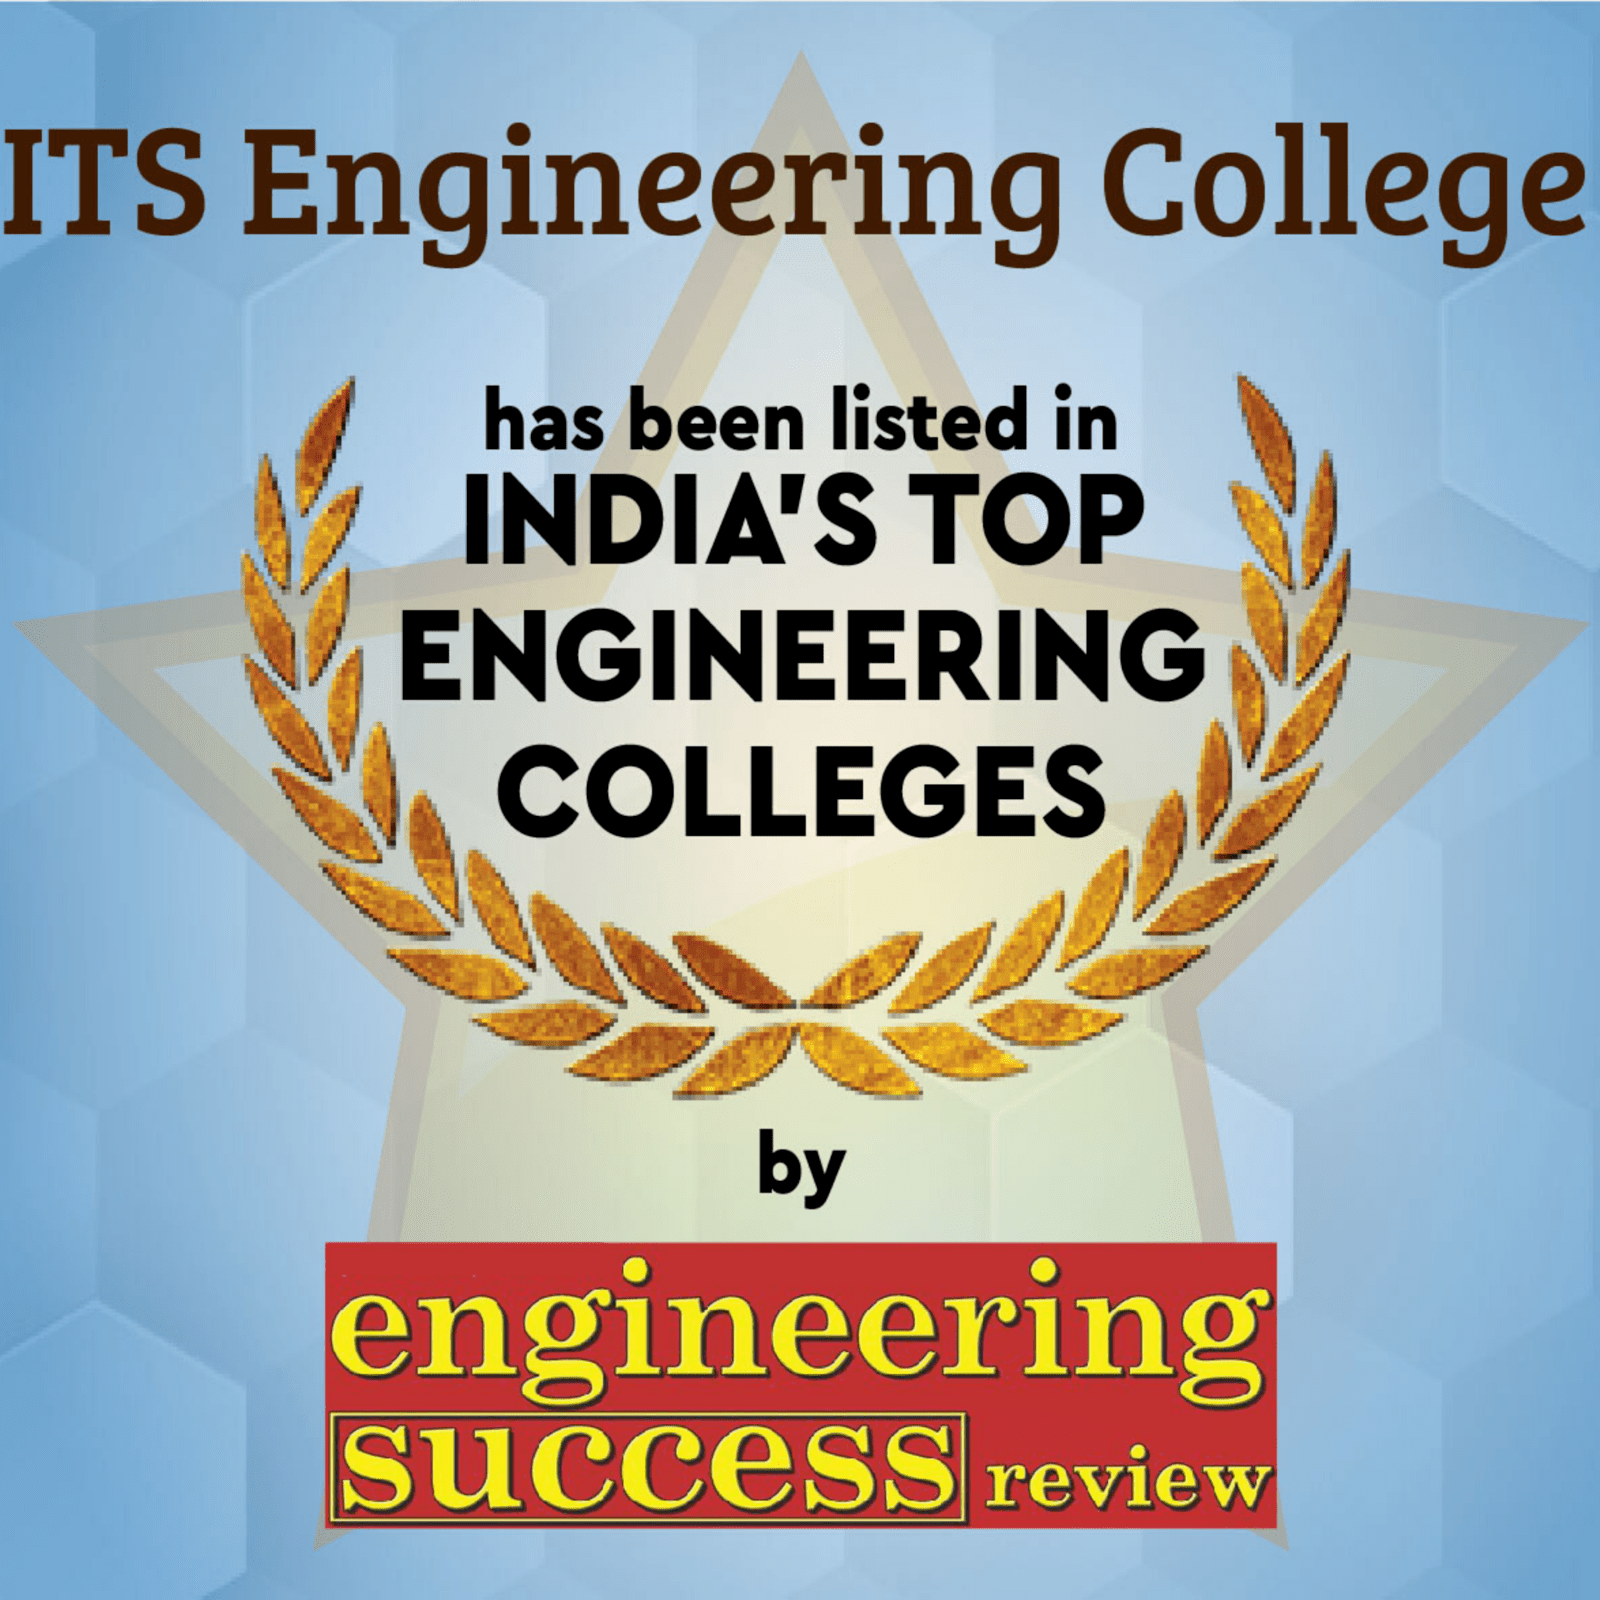 ITS Listed as Top Engineering Colleges by Engineering Success Review